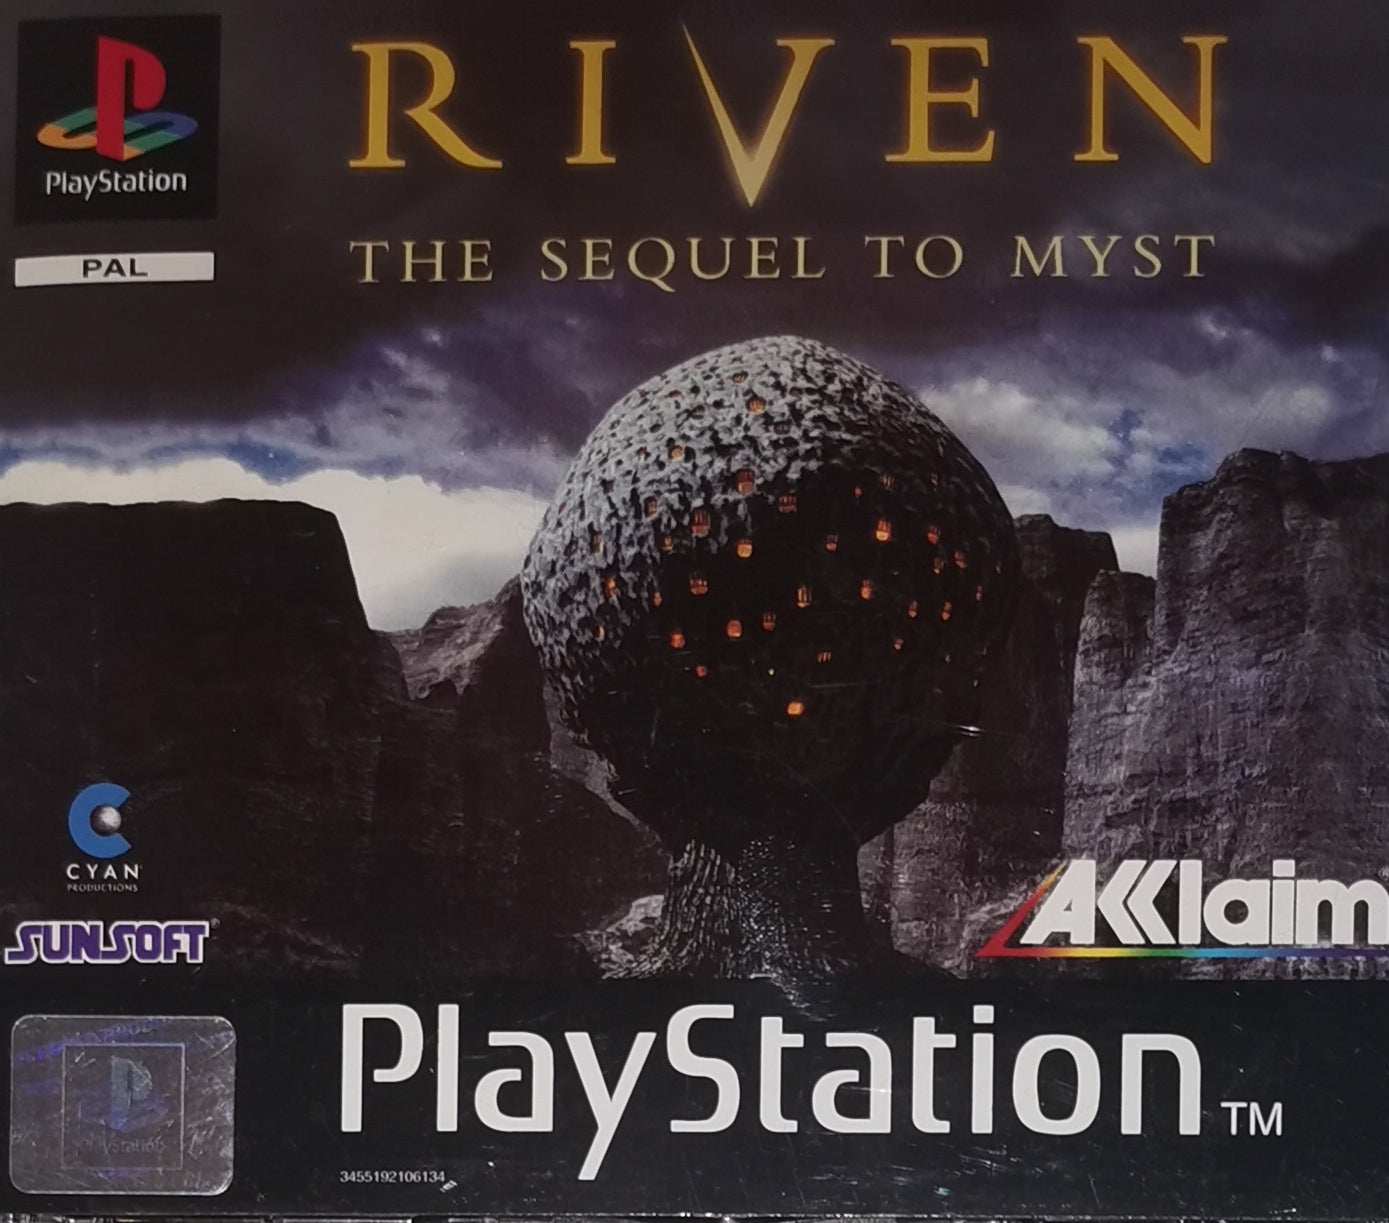 Riven The Sequel to Myst (Playstation 1) [Wie Neu]